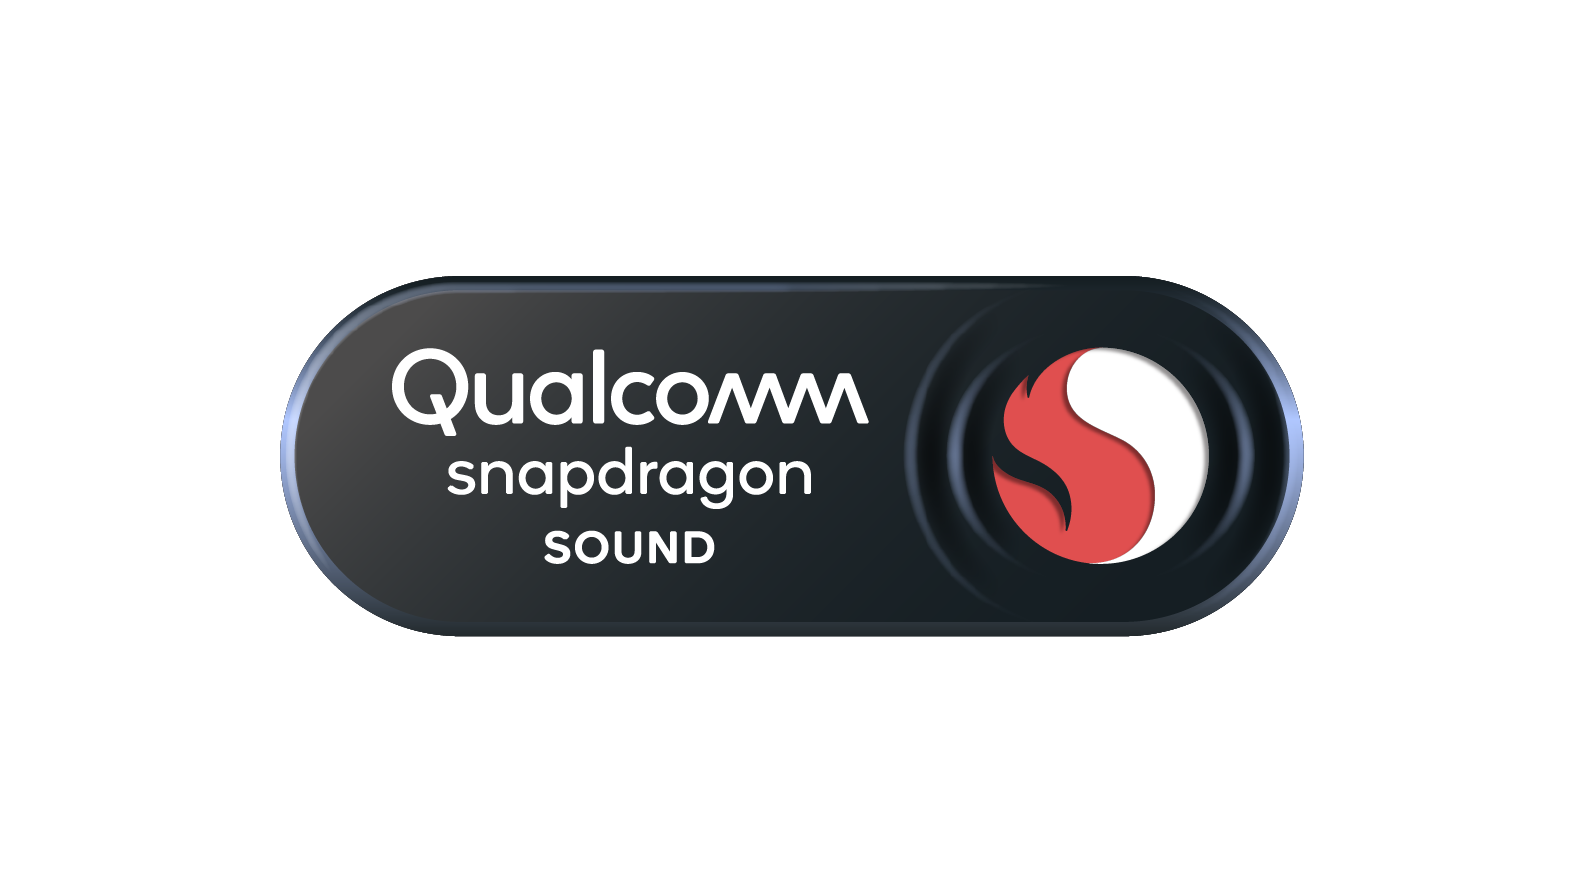 Expect to see this branding on headphones and wireless earbuds in the near future. (Image: Qualcomm)